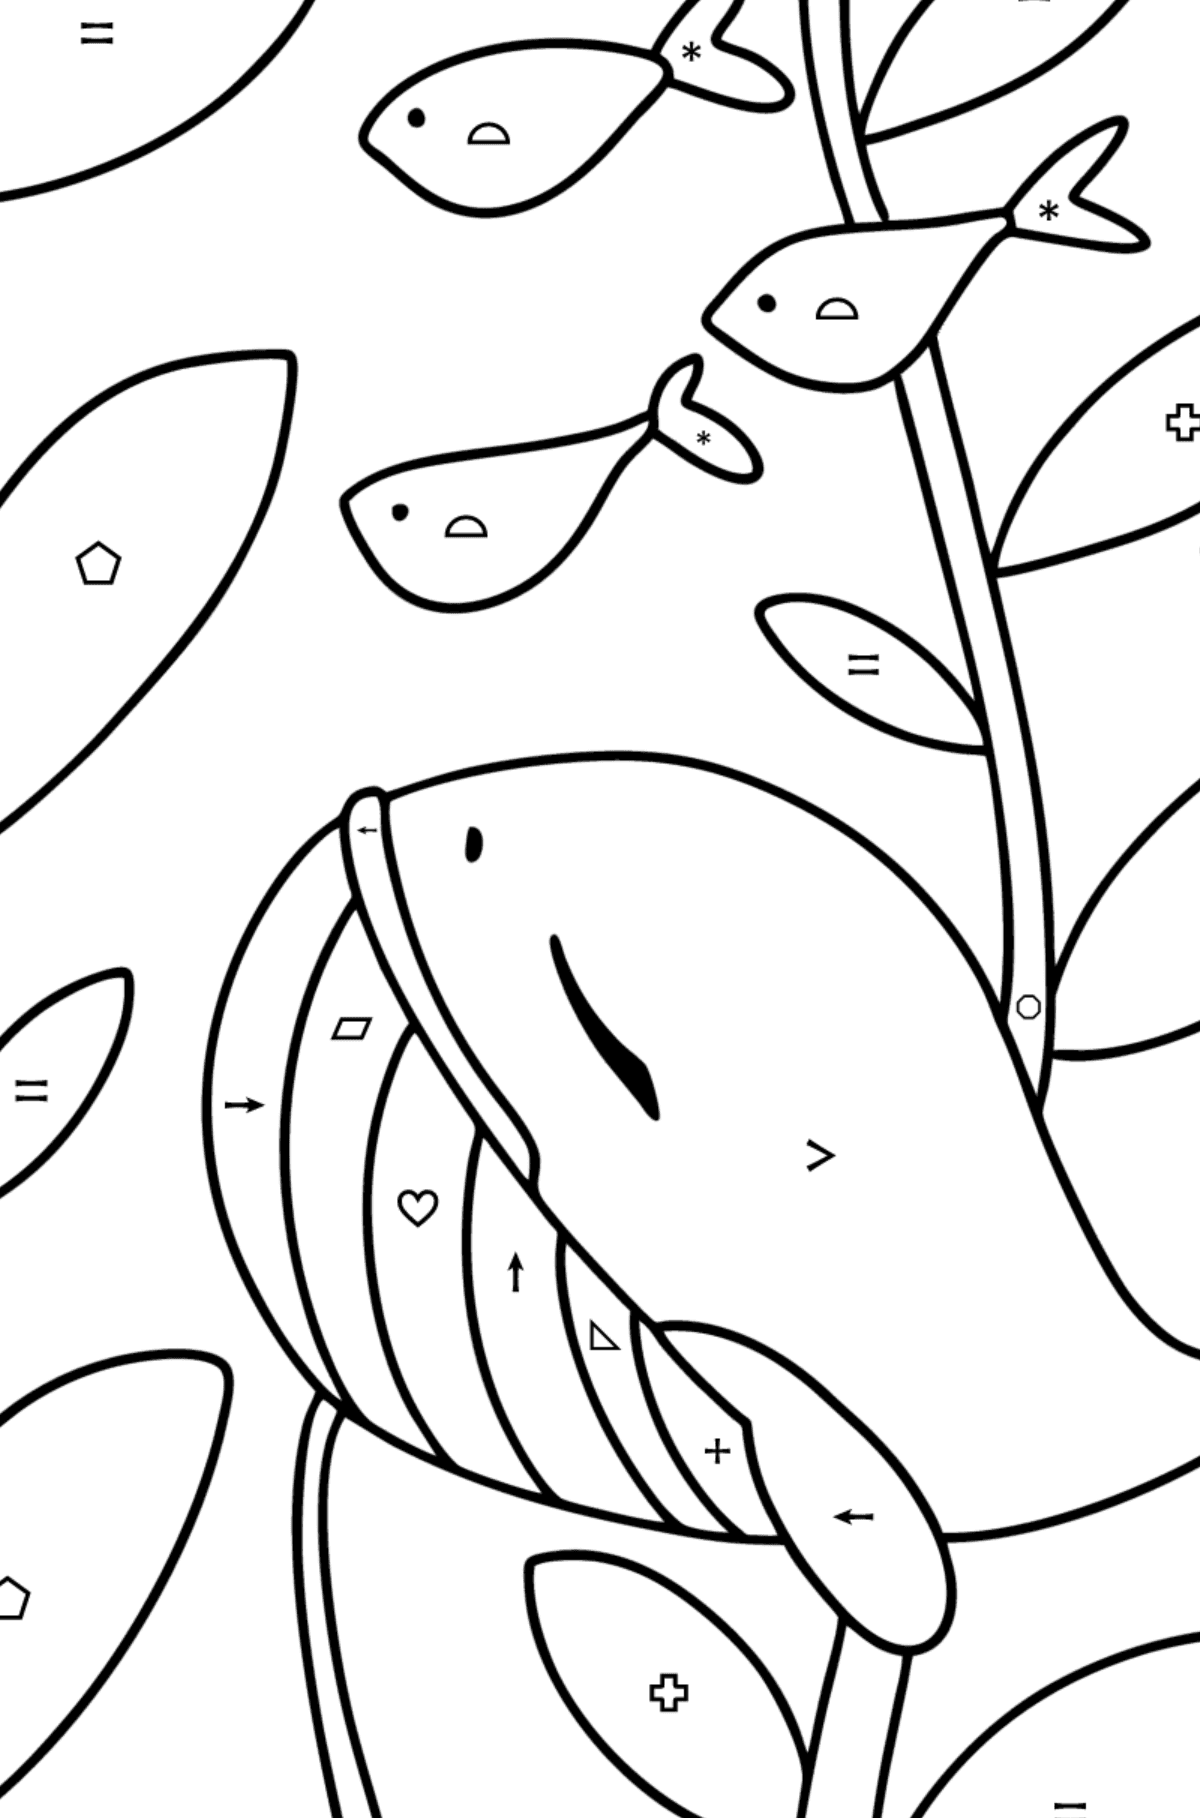 Whale baby coloring page - Coloring by Symbols and Geometric Shapes for Kids